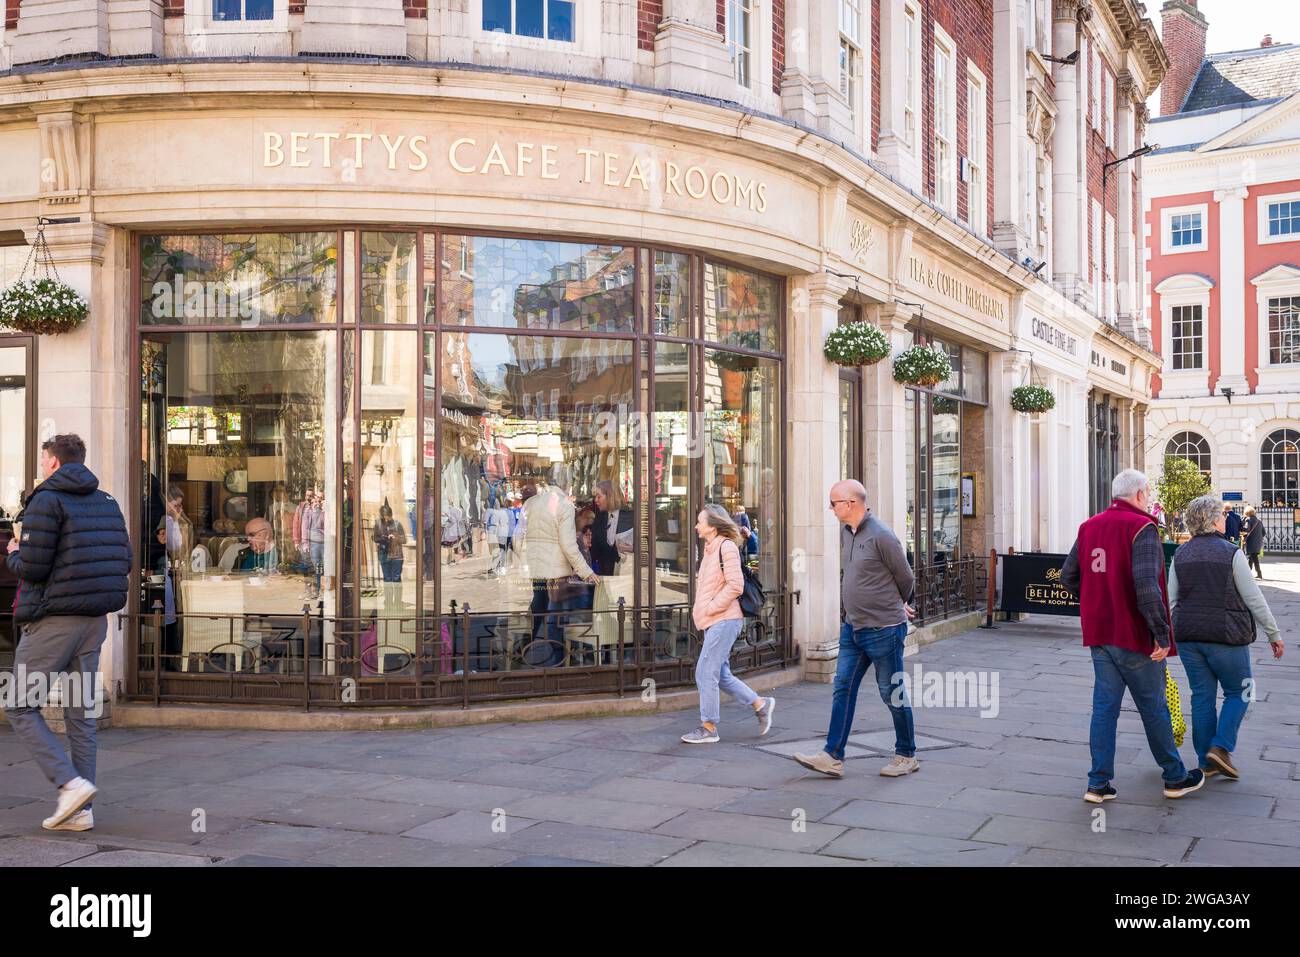 YORK, UK - April 18, 2023. Exterior of Bettys Tea Rooms, a famous cafe in York, UK Stock Photo